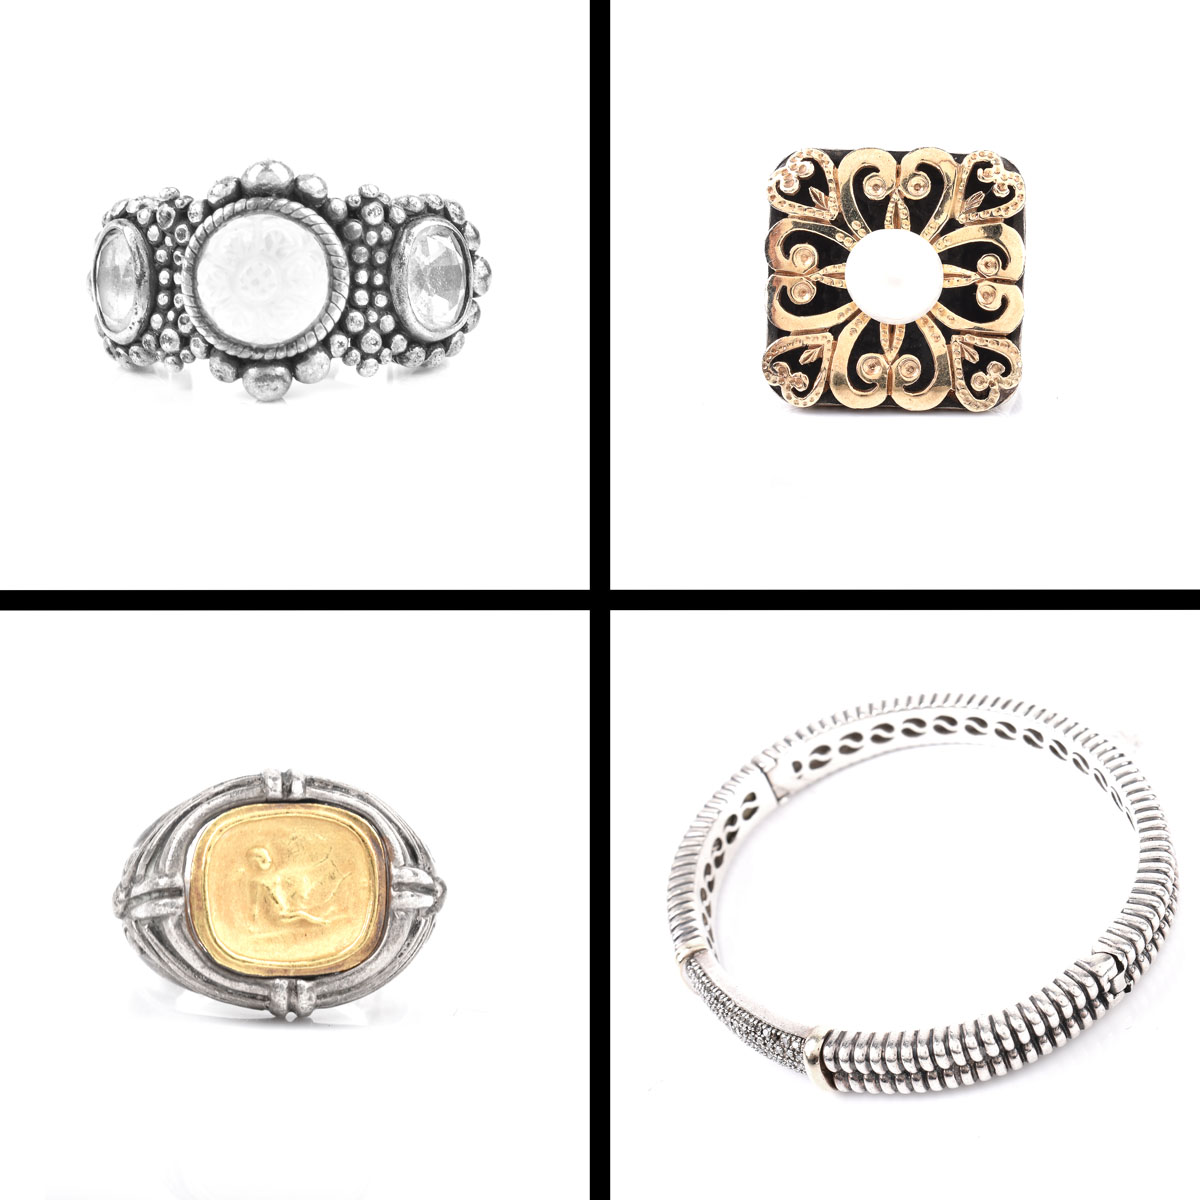 Collection of Vintage Jewelry Including: Sterling Silver and 14 Karat Yellow Gold Hinged Bangle Bracelet; Sterling Silver and 18 Karat Yellow Gold Coin Ring; Sterling Silver 14 Karat Yellow Gold and Pearl Ring and a Stephen Dweck Sterling Silver and Carve